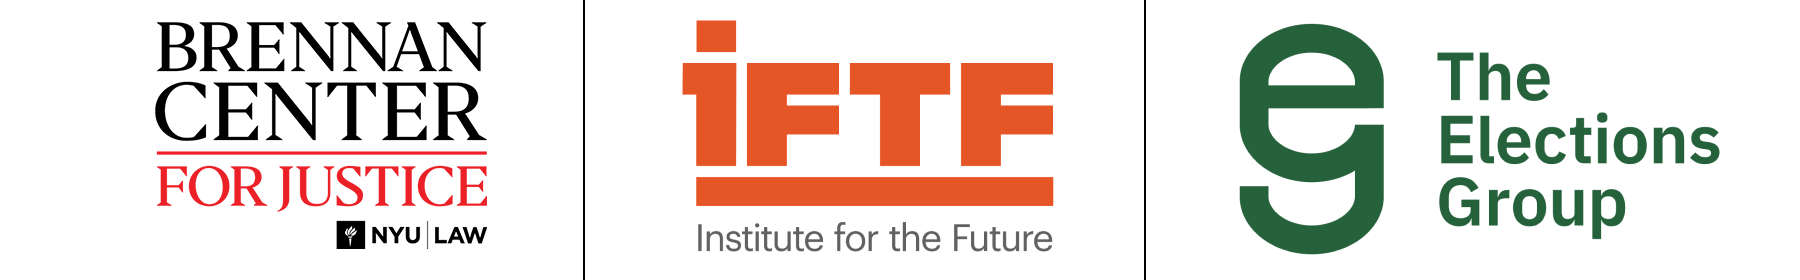 Logos of the Brennan Center, IFTF, and TEG